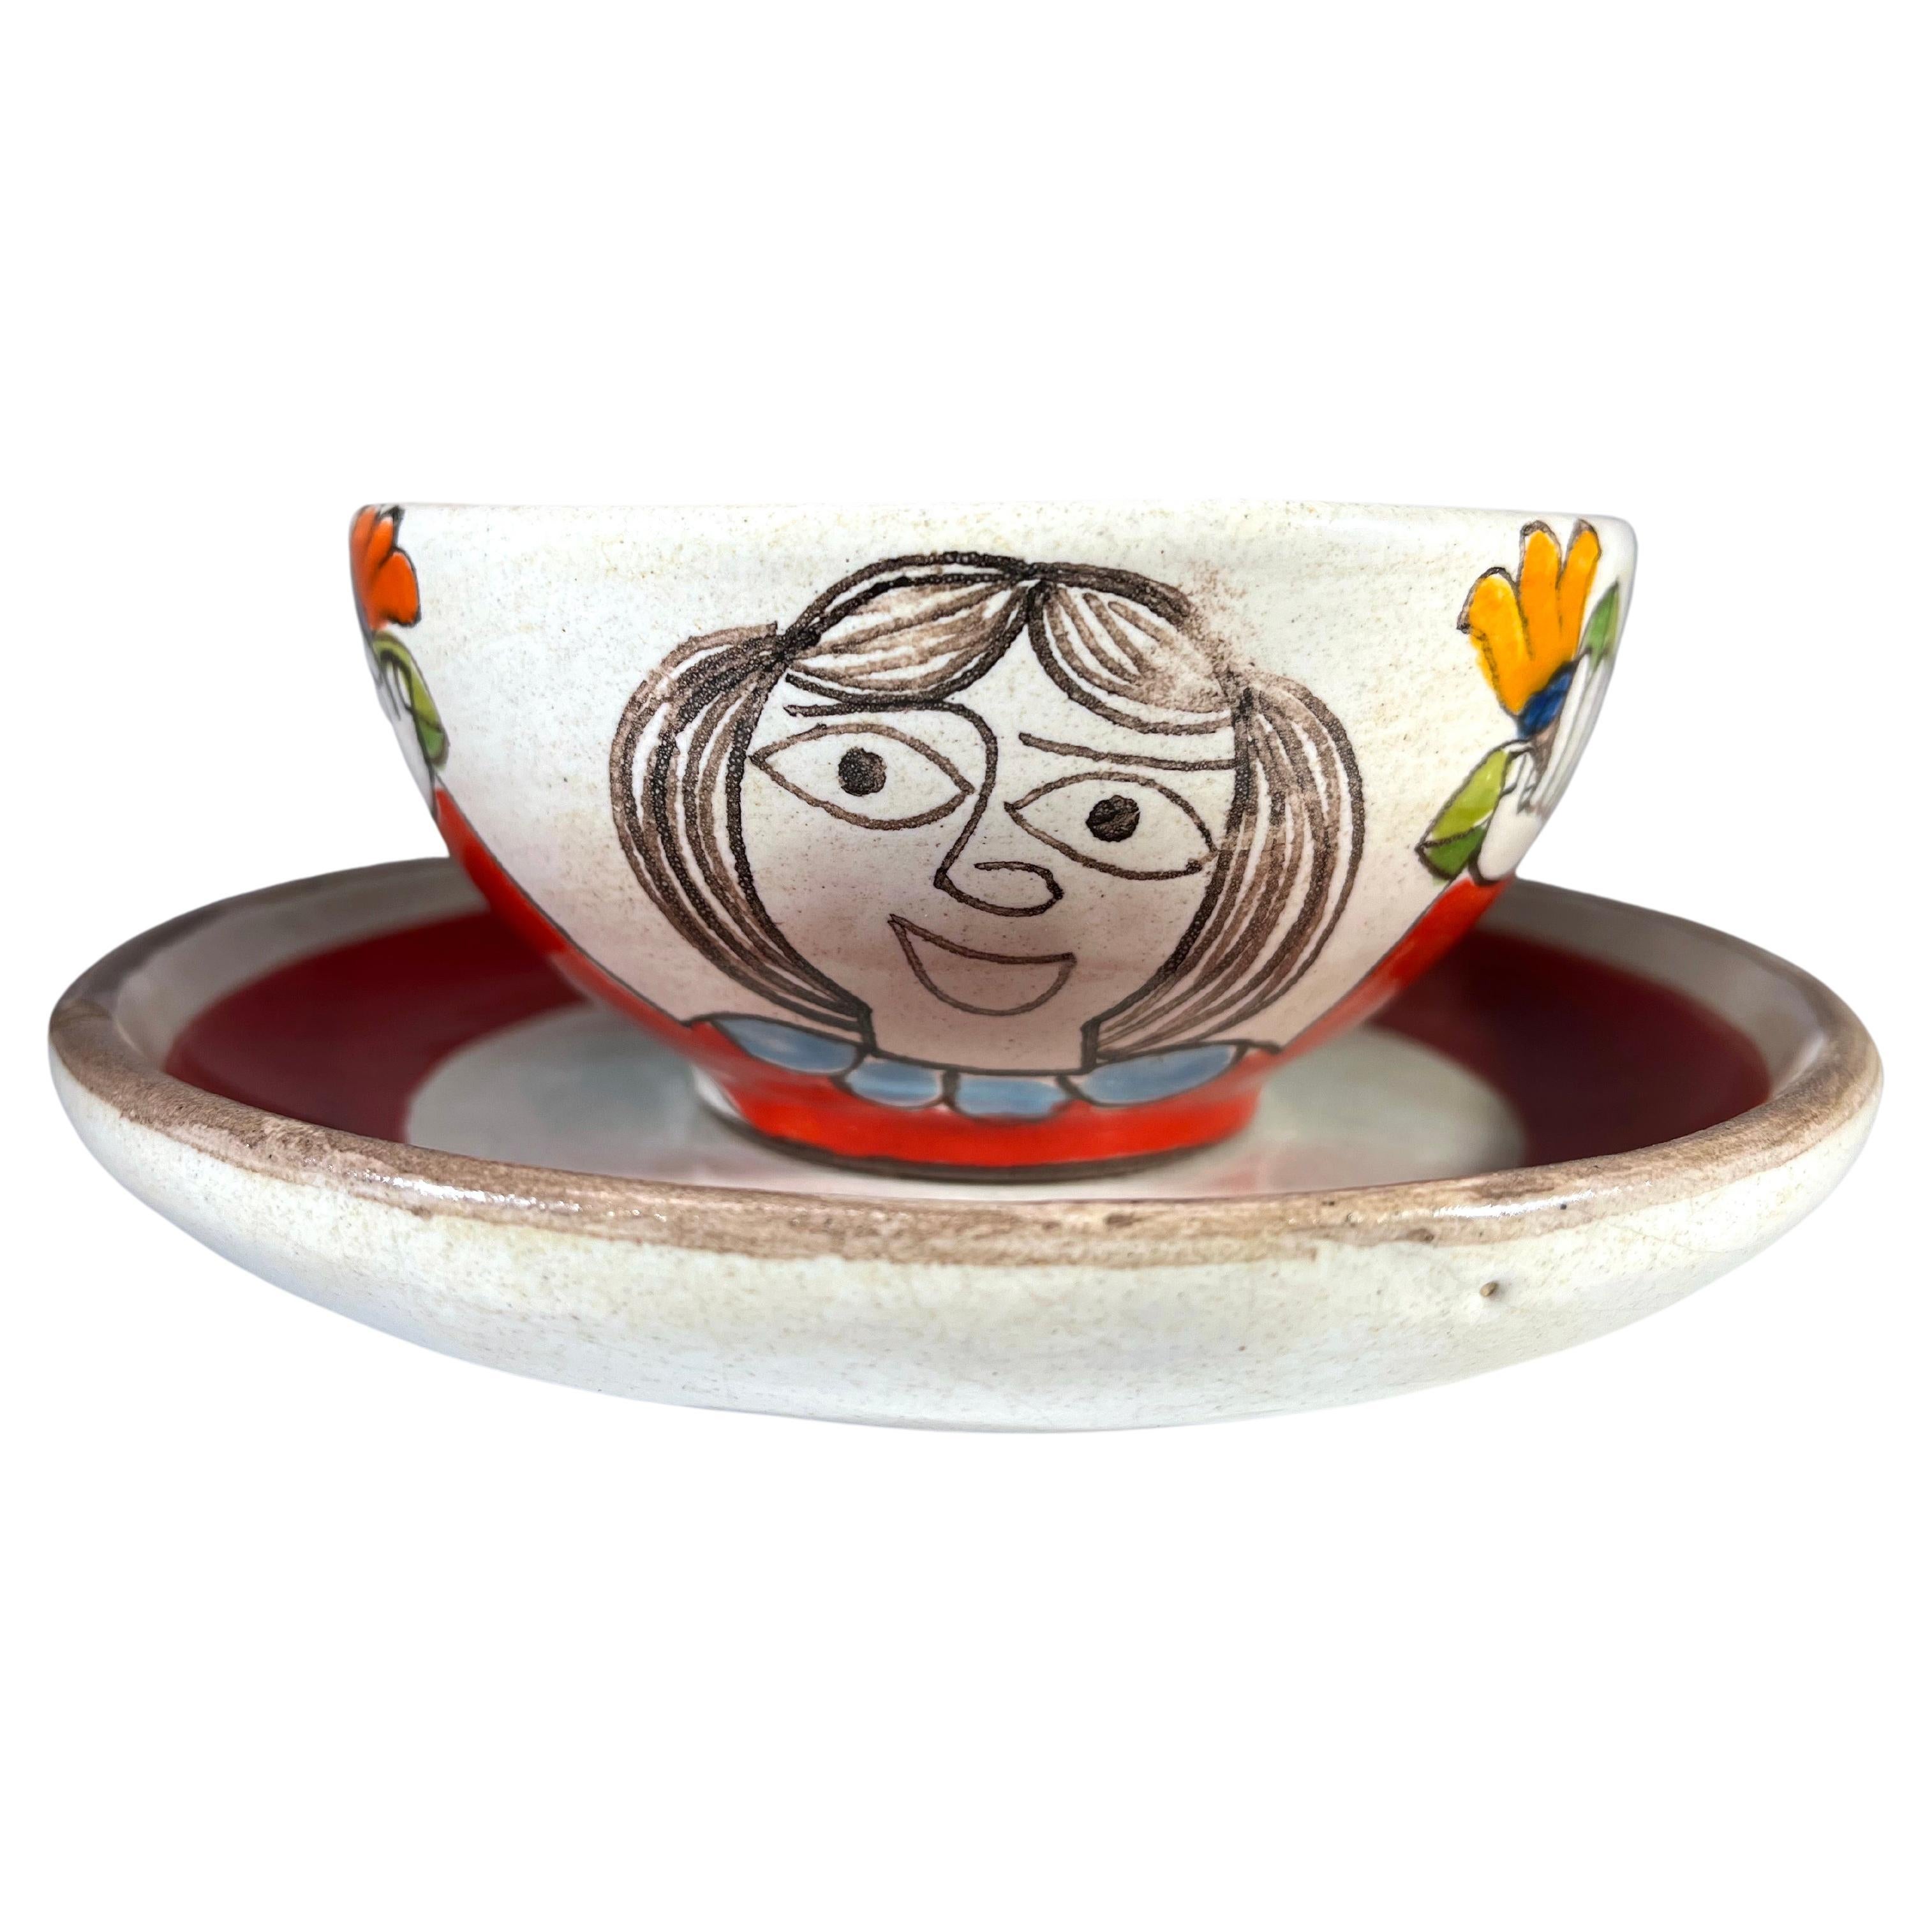 DeSimone of Italy, Hand Painted Ceramic Mid-Century Cup And Saucer c1960